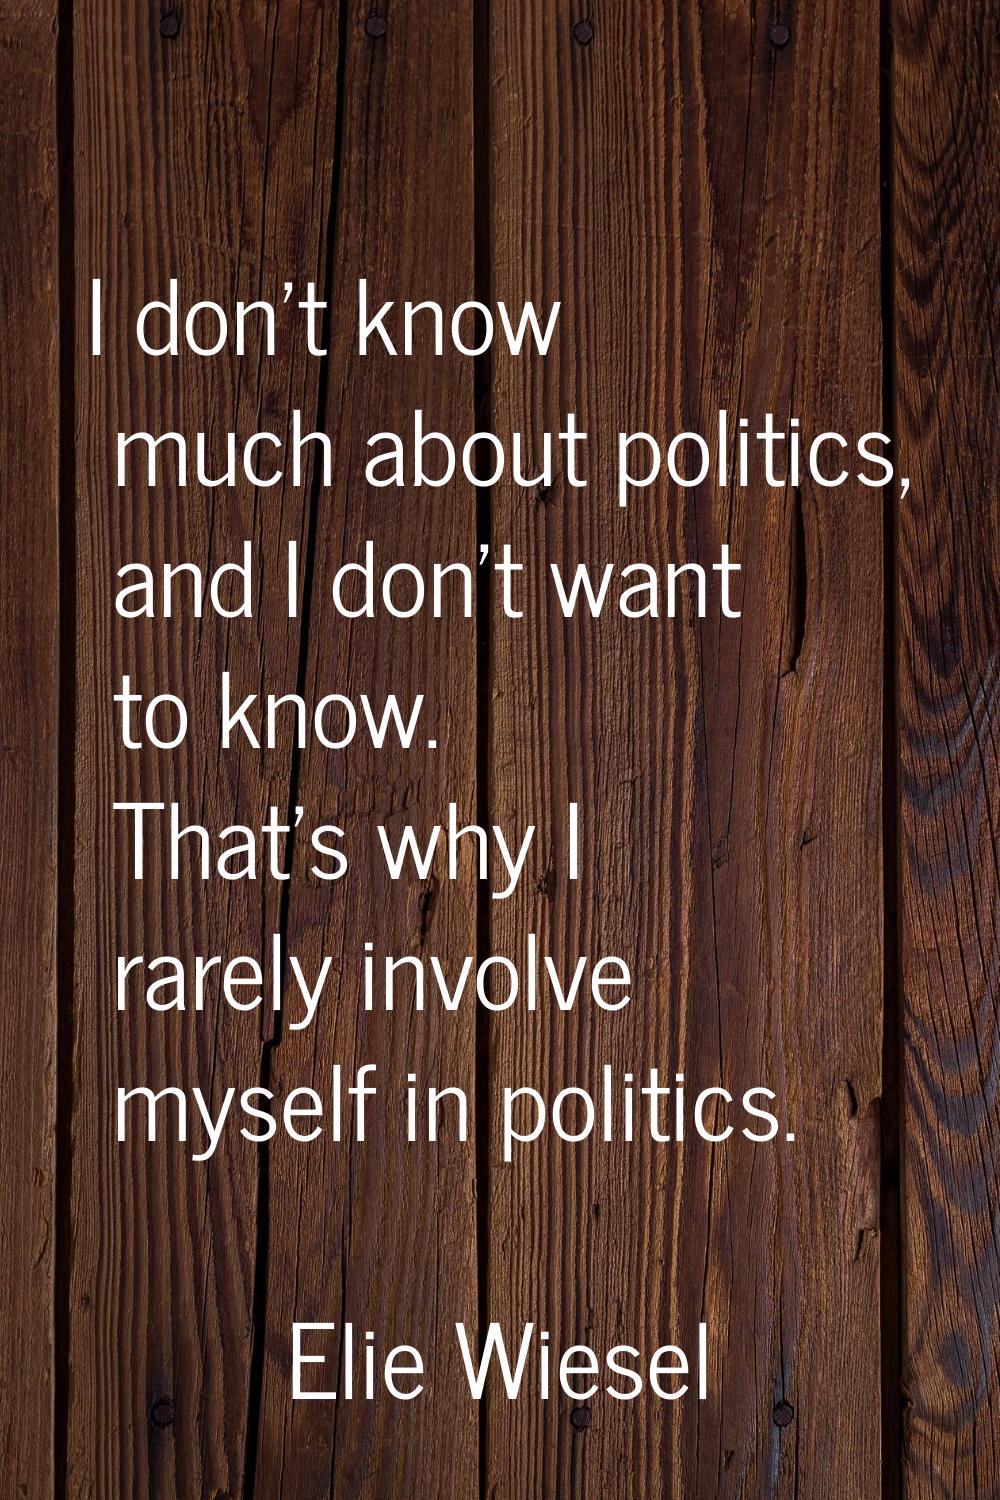 I don't know much about politics, and I don't want to know. That's why I rarely involve myself in p